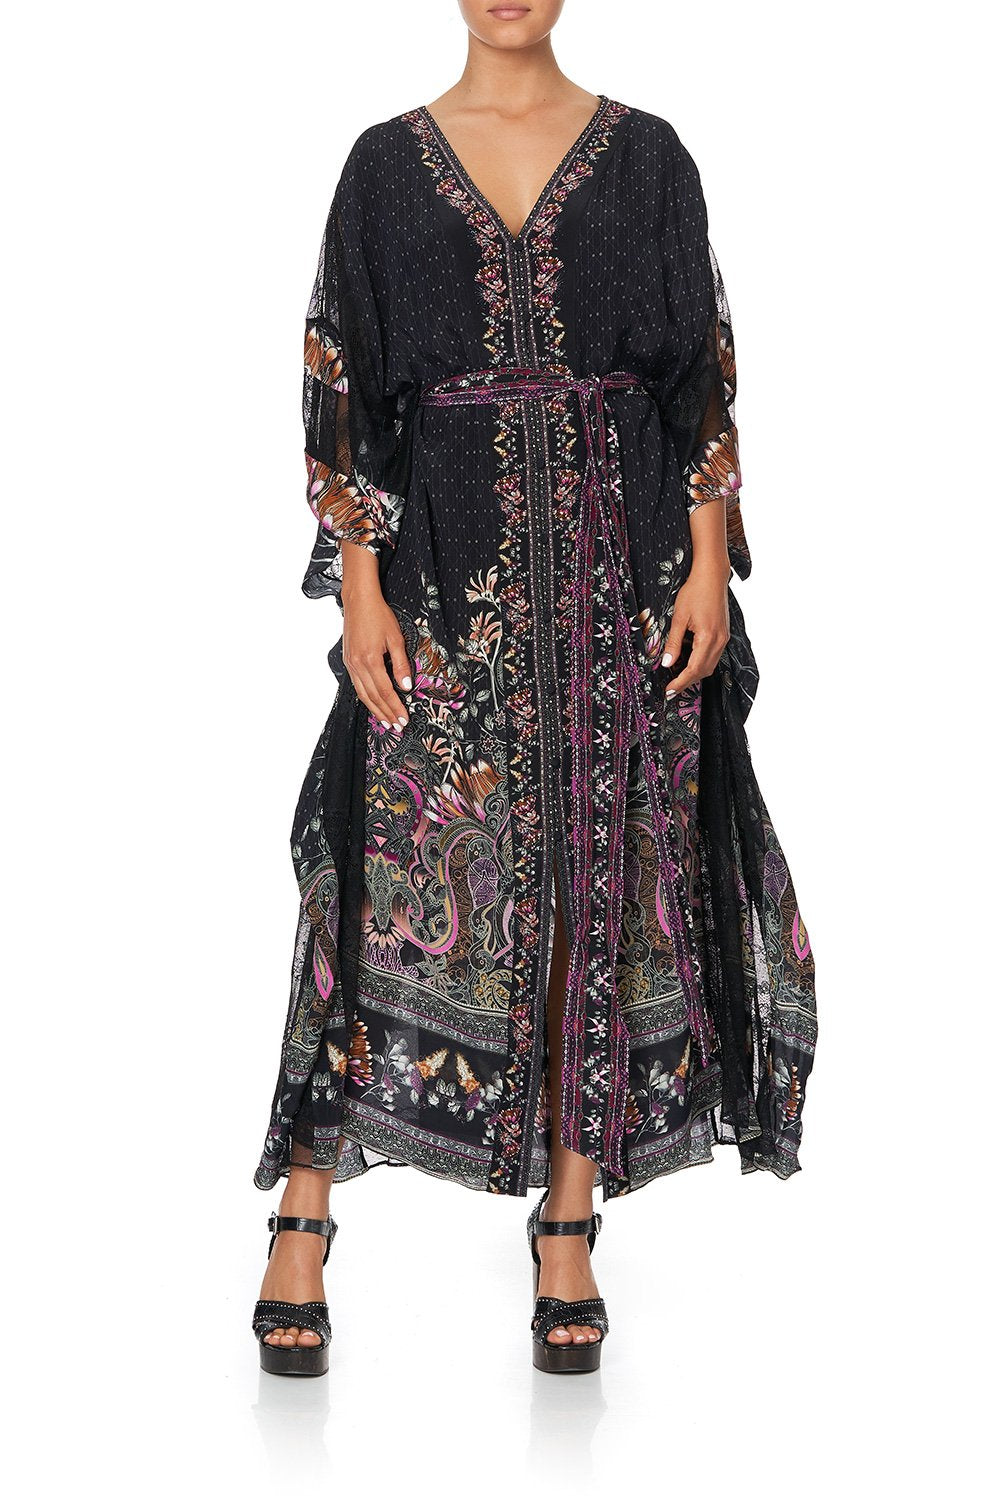 BUTTON UP KAFTAN WITH PANELS RESTLESS NIGHTS – CAMILLA